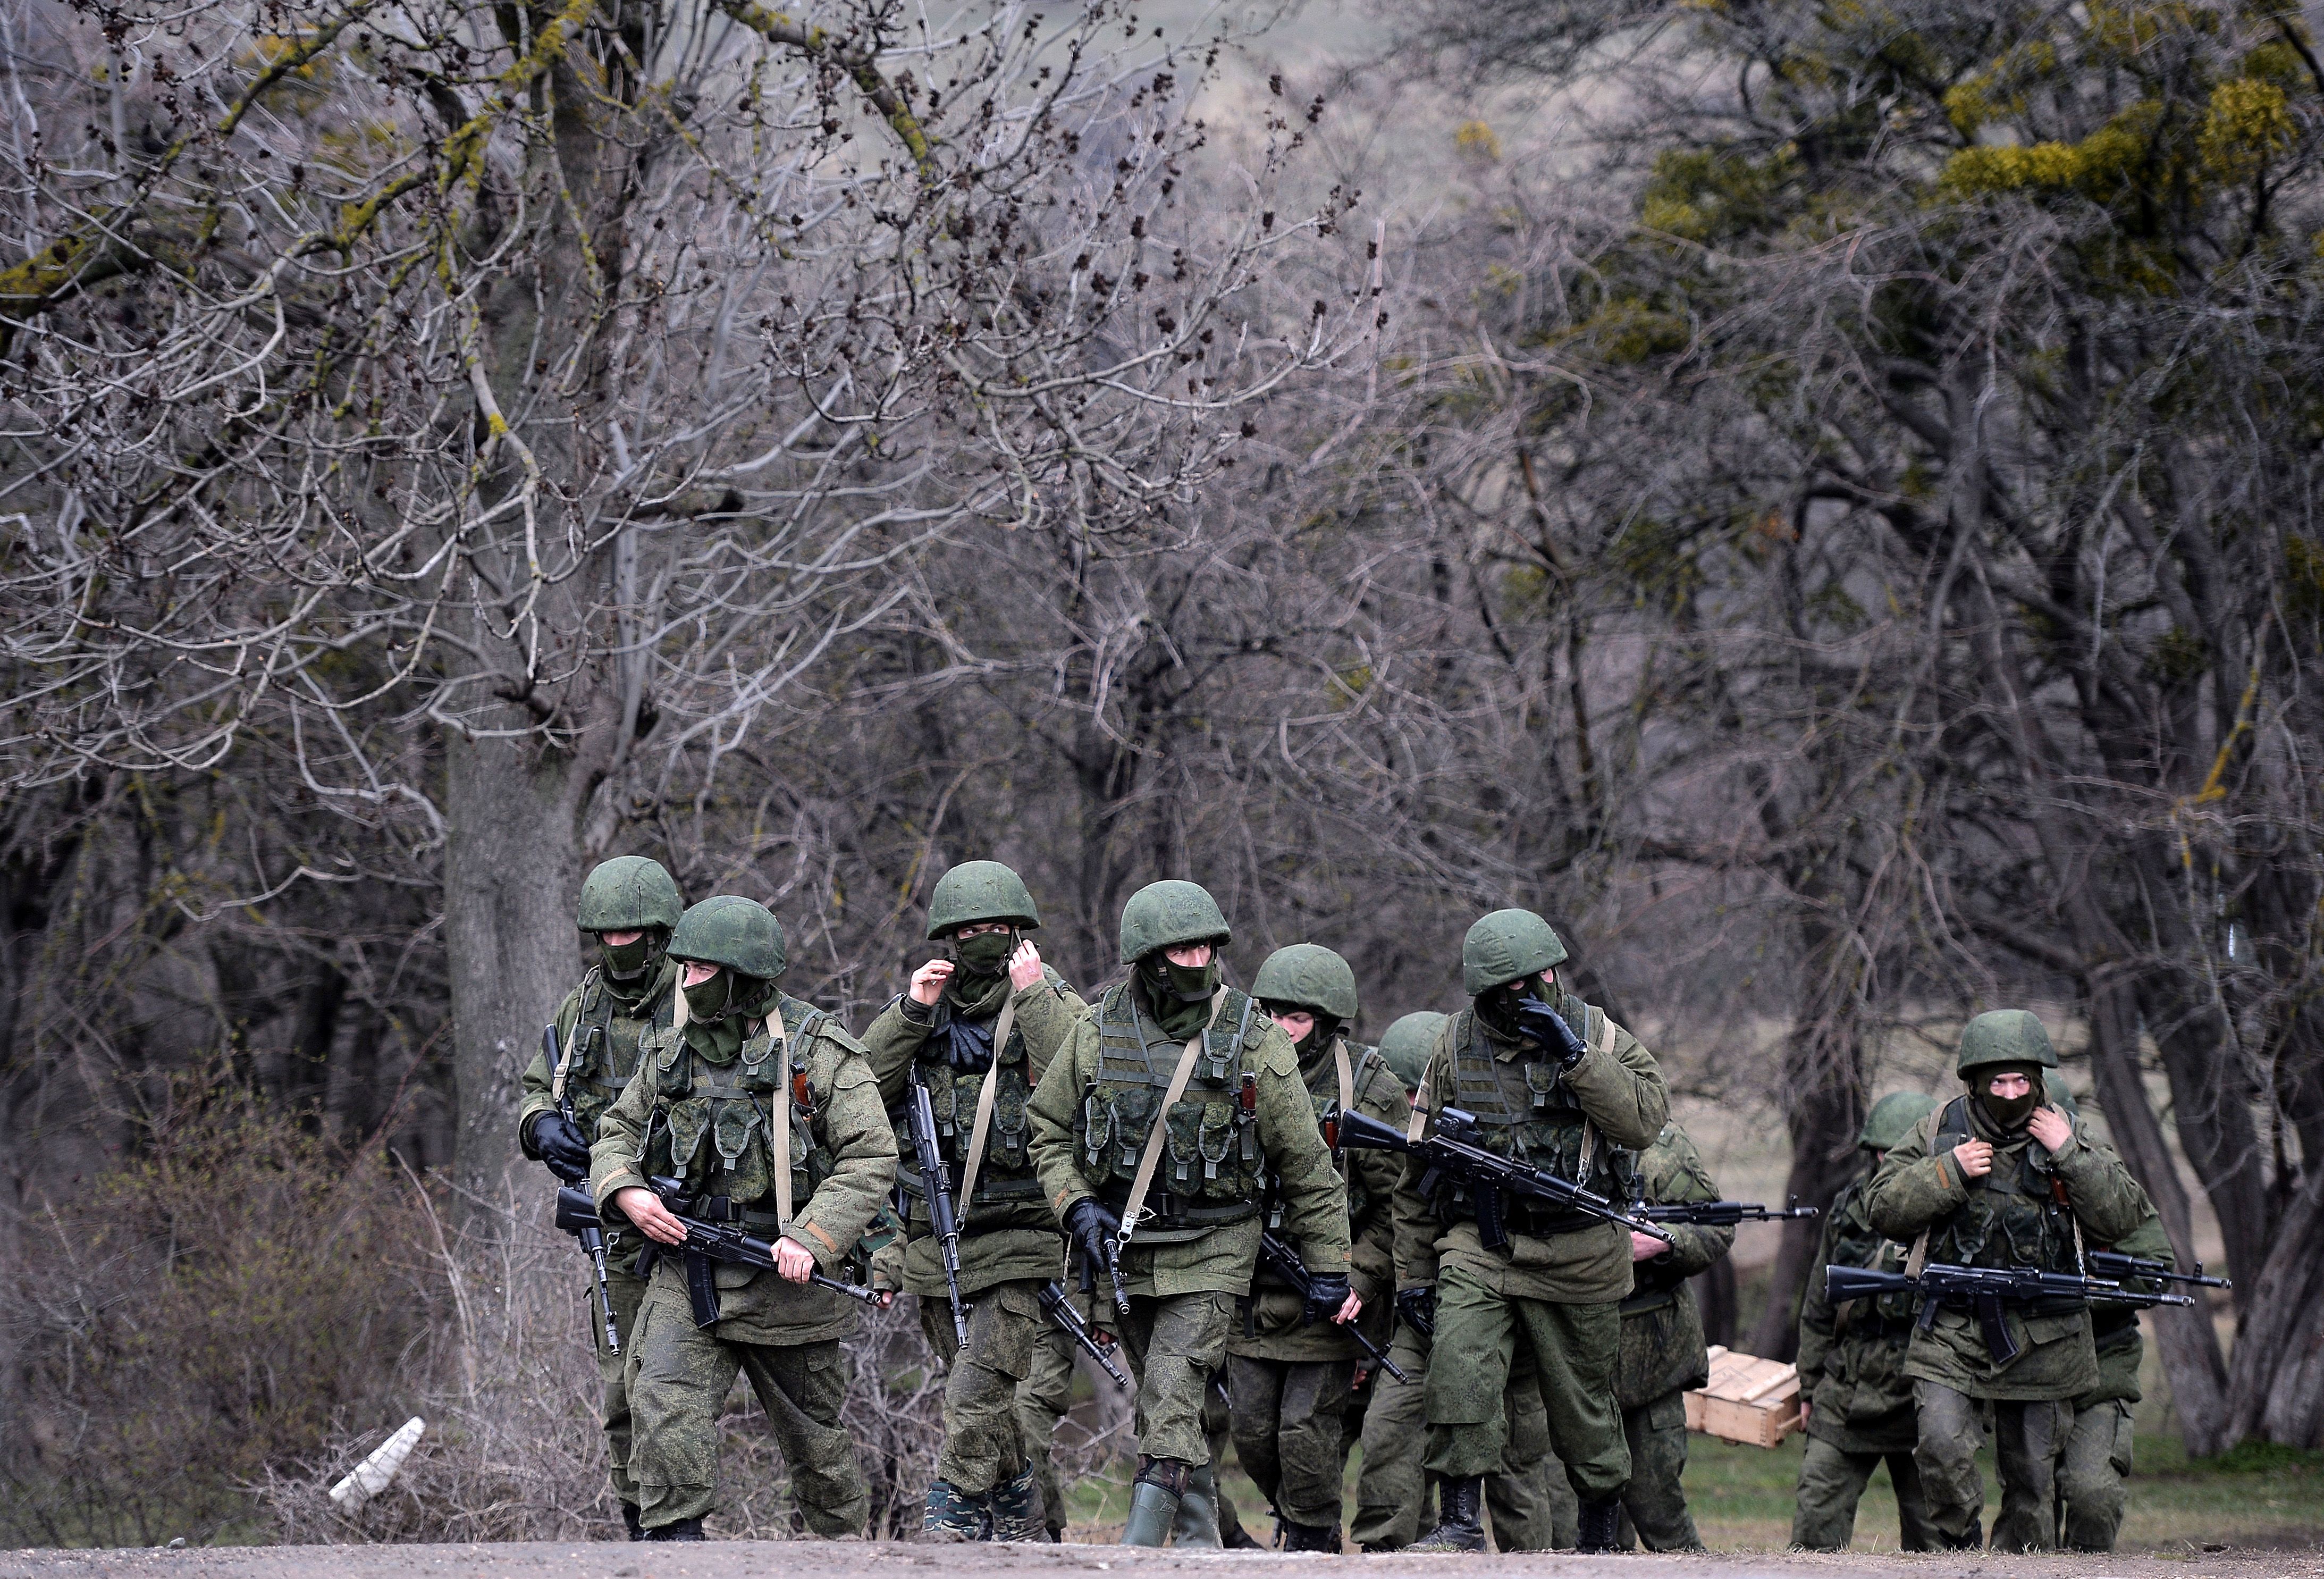 Russian soldiers patrol the area surrounding the Ukrainian military unit in Perevalnoye, outside Simferopol, on March 20, 2014